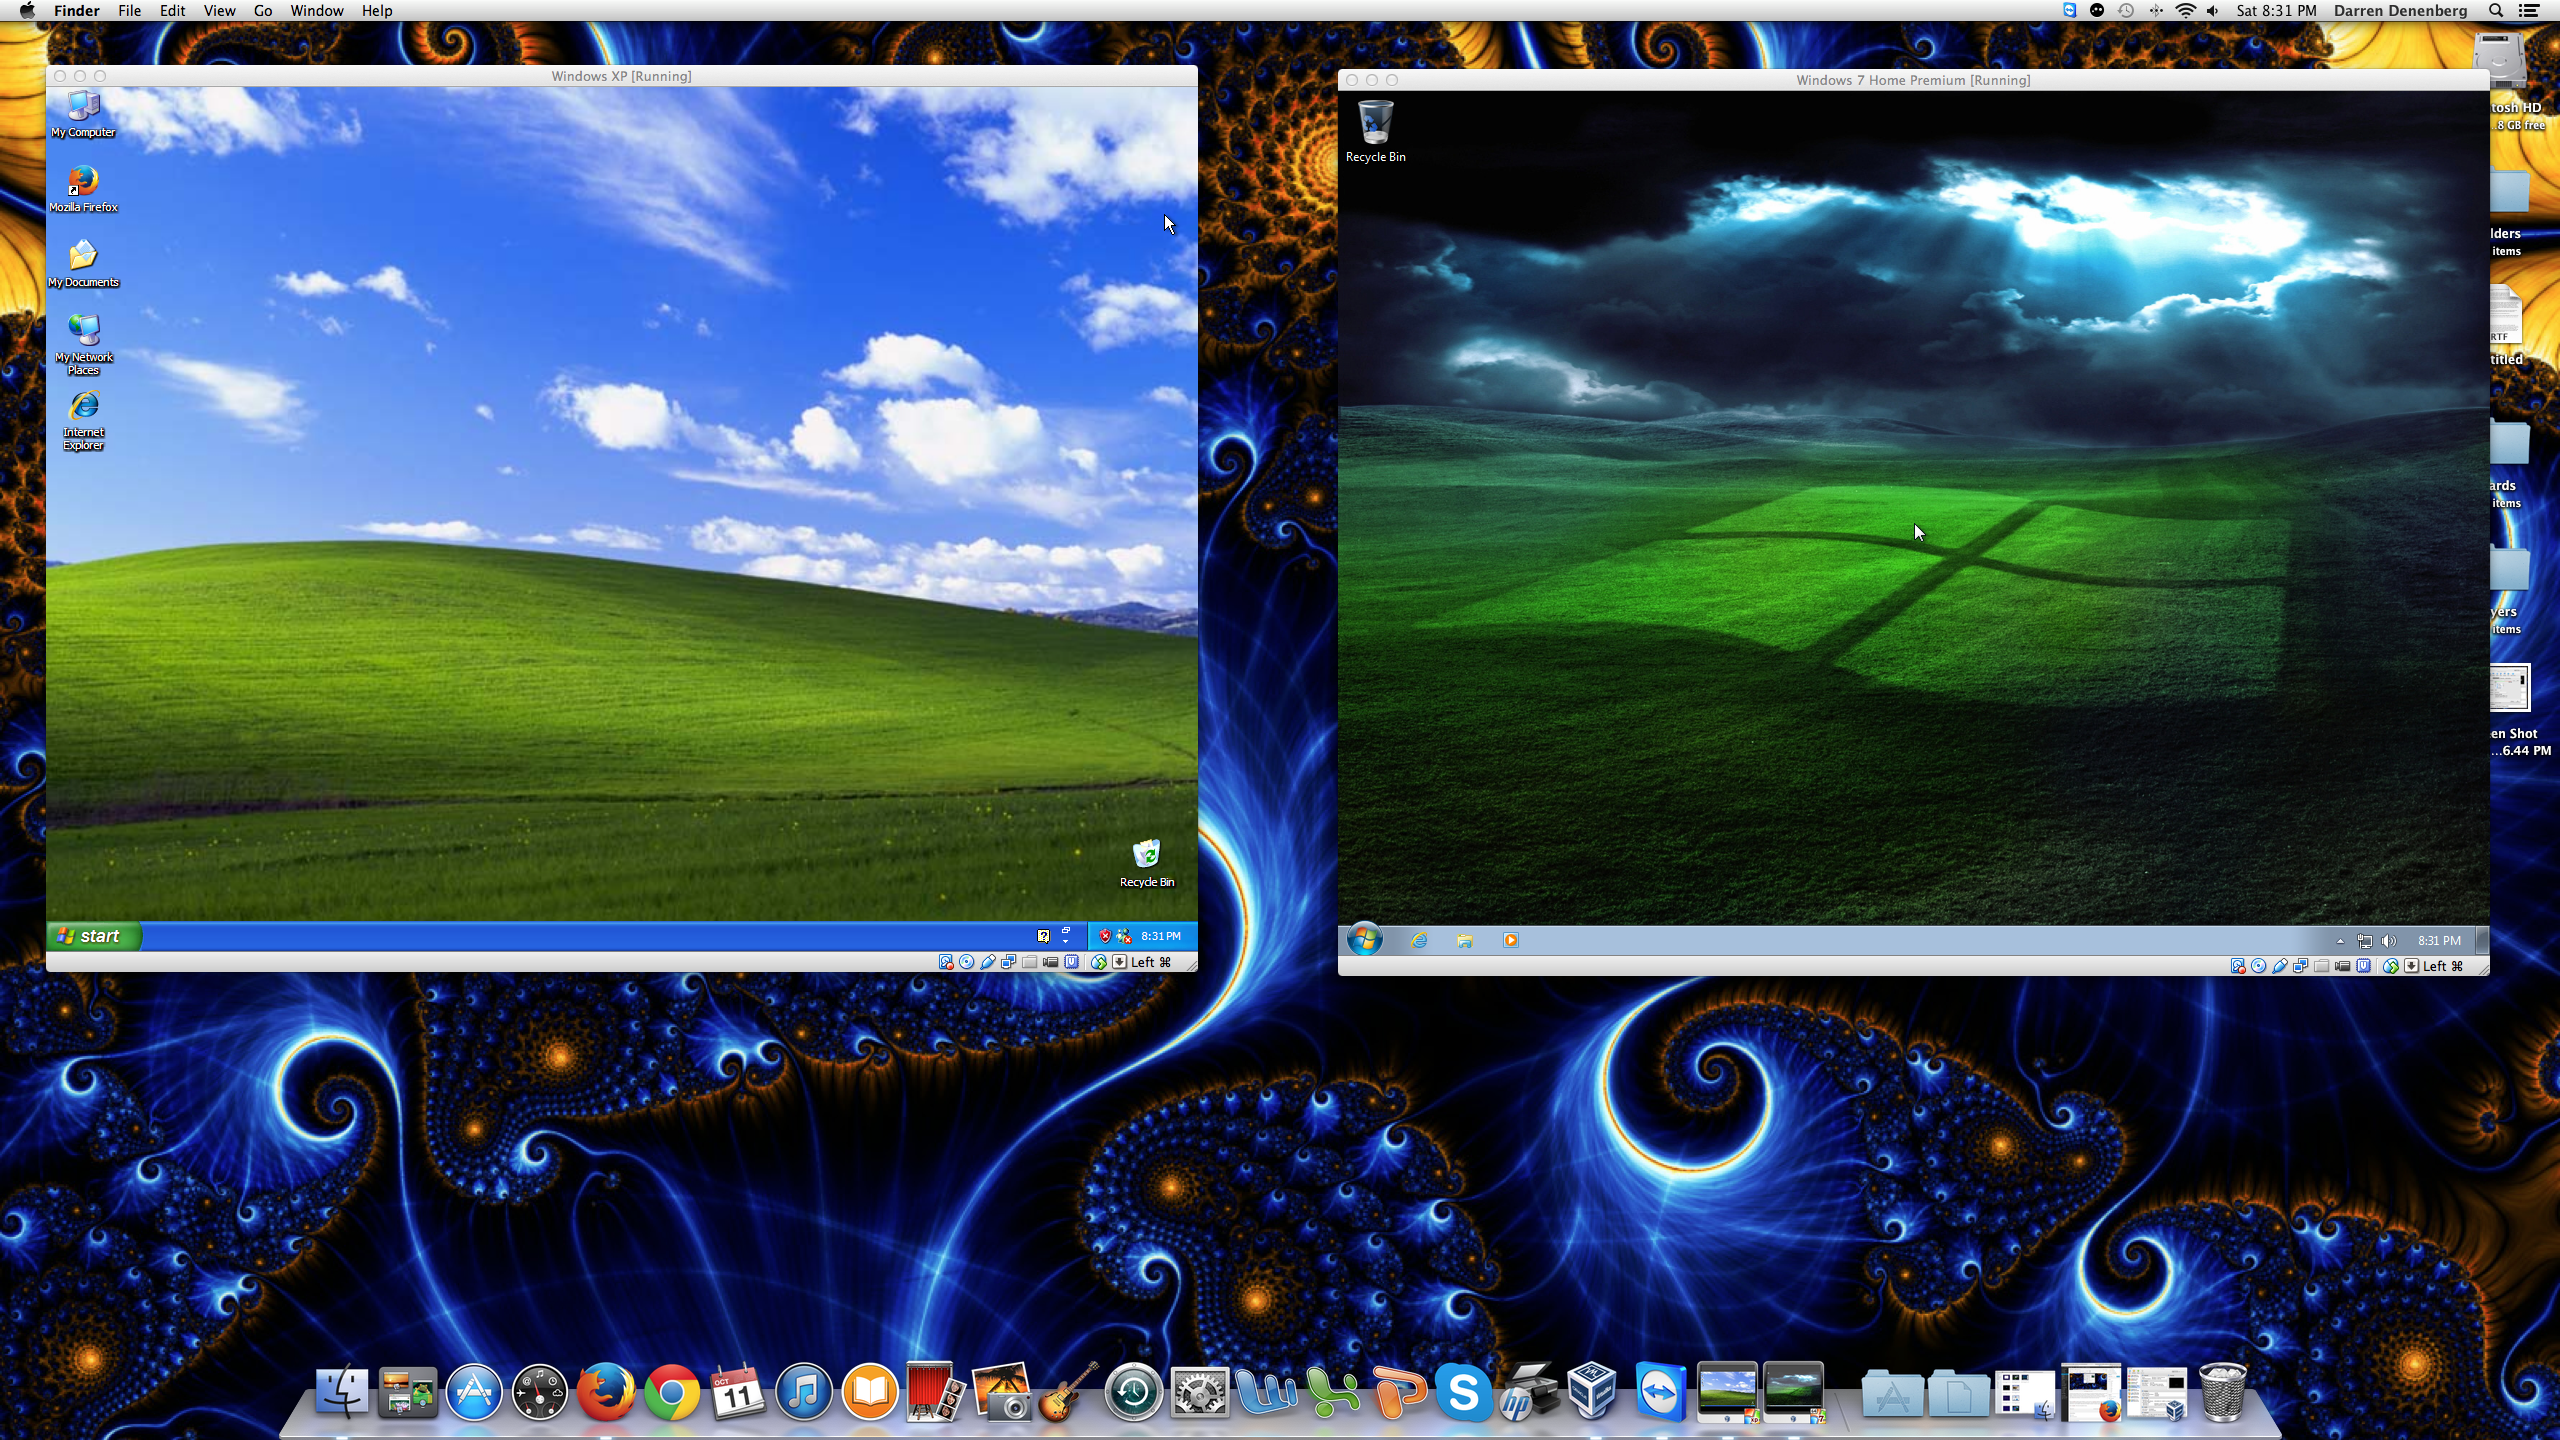 Windows XP and Windows 7 running in their own Windows